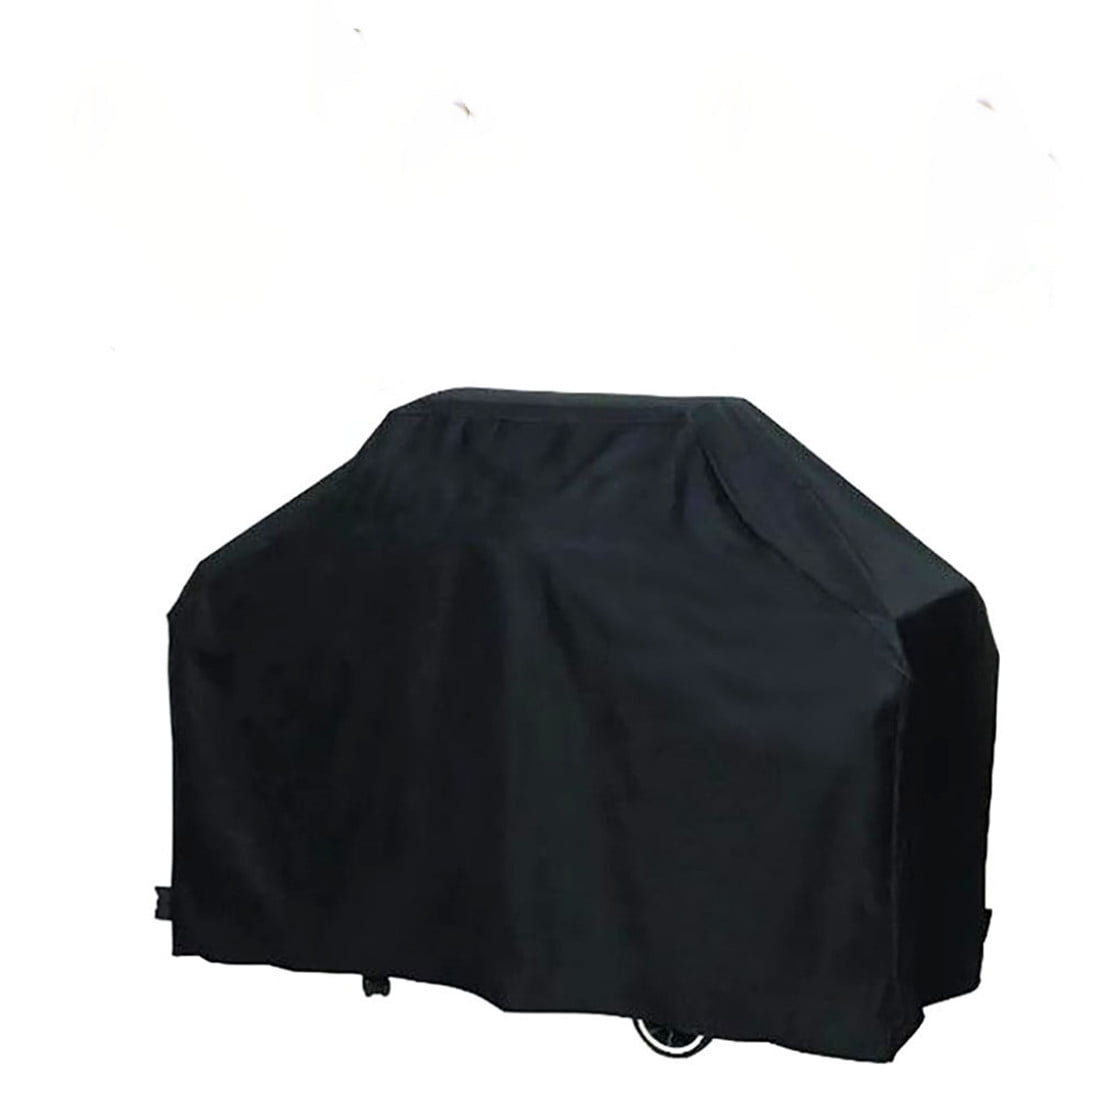 BBQ Gas Grill Cover 67" Barbecue Waterproof Outdoor Heavy Duty Protection Black 